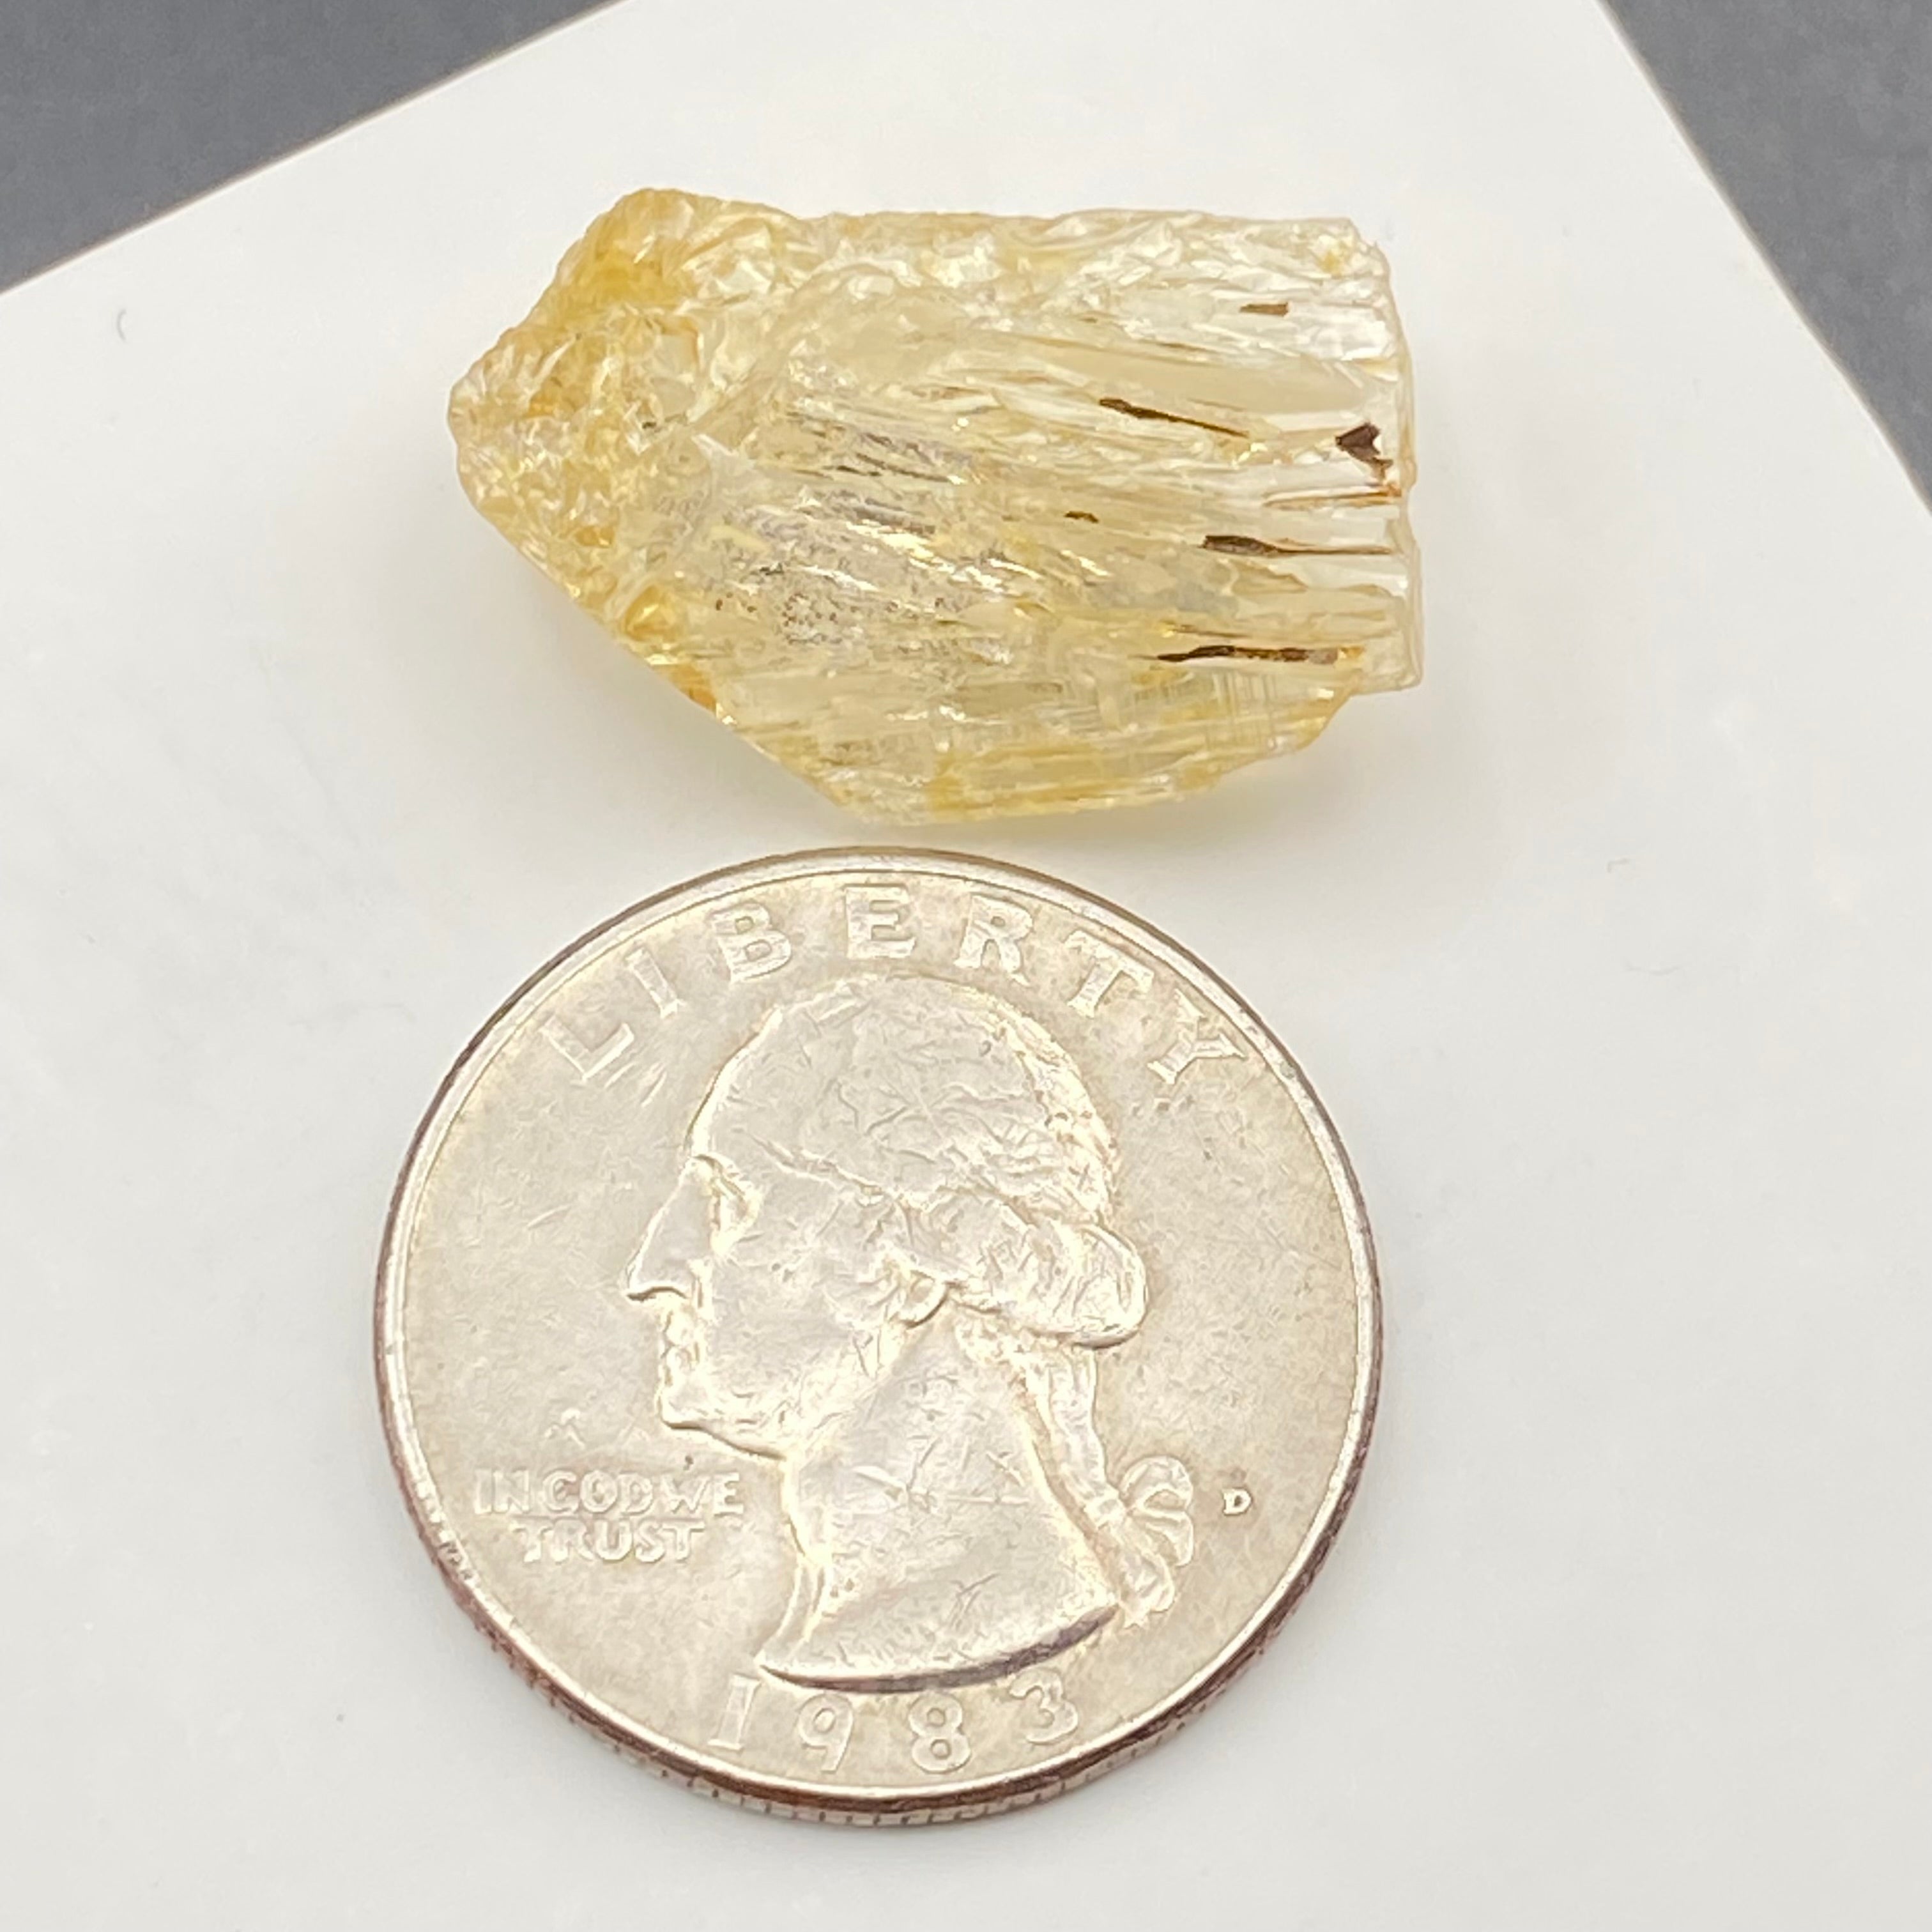 Imperial Topaz Natural Full Terminated Crystal - 154